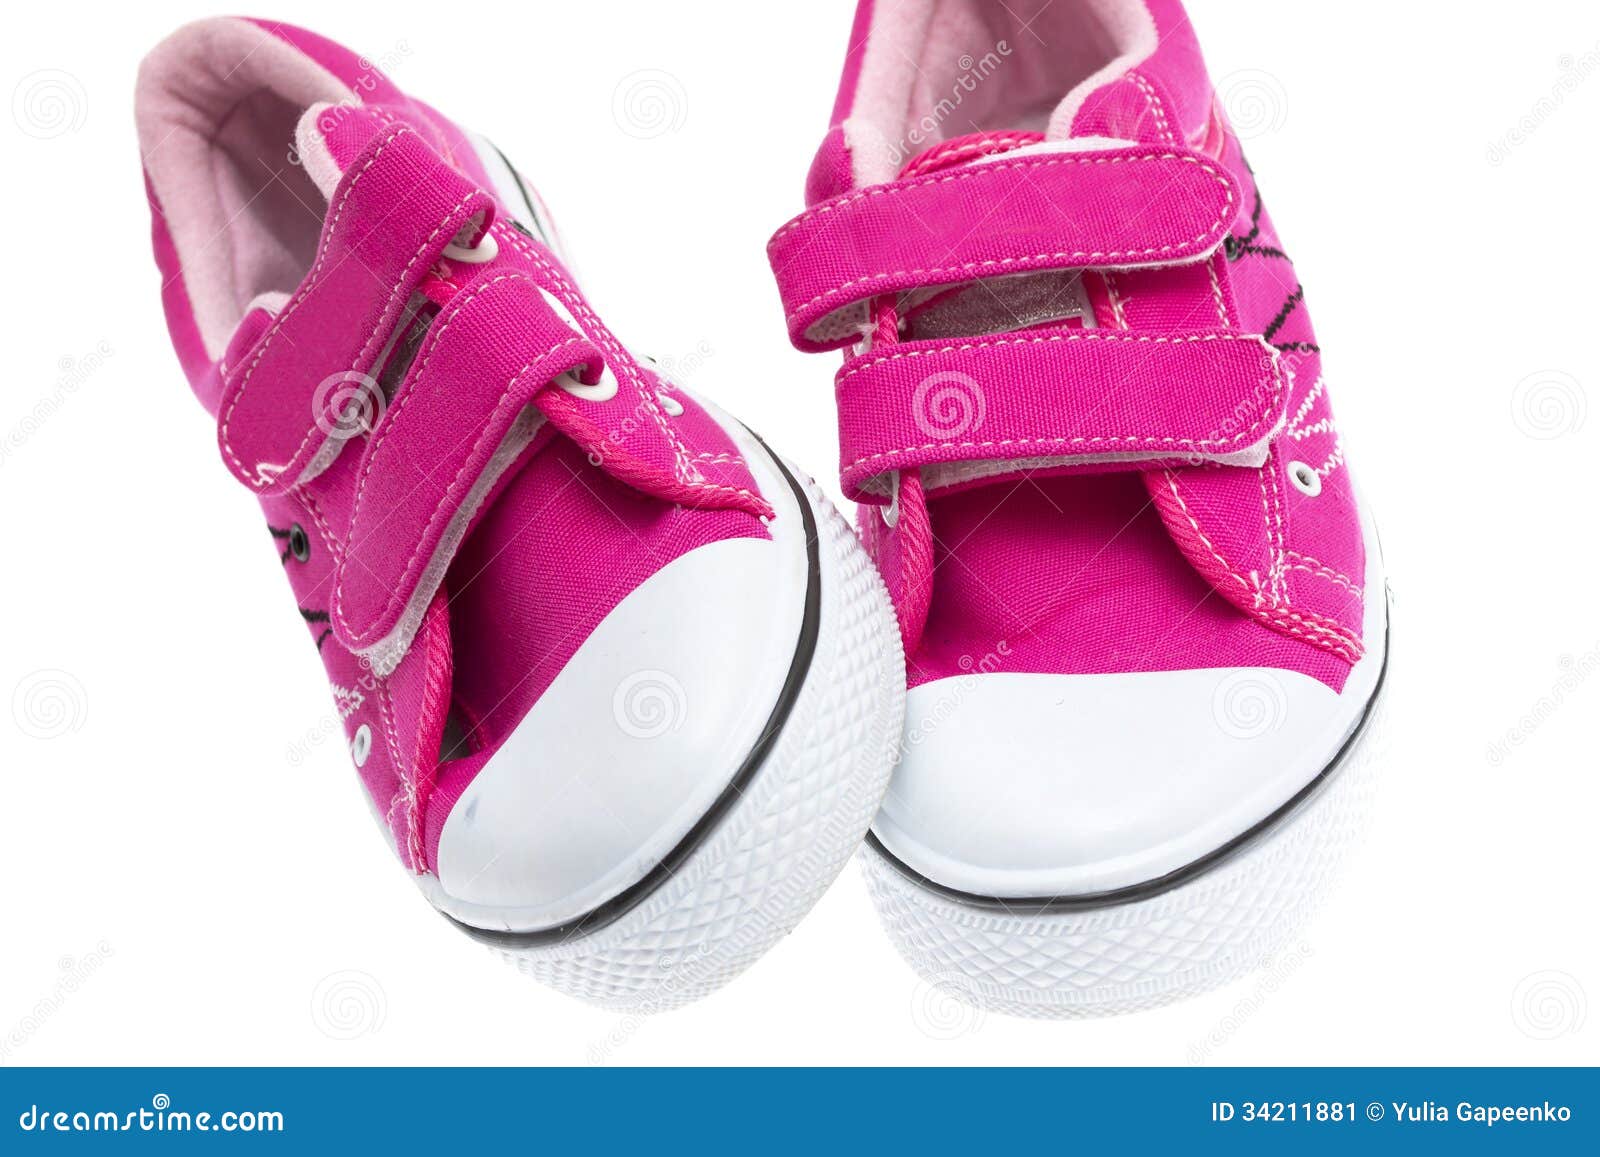 Pink Sneakers Isolated on White Background Stock Image - Image of pink ...